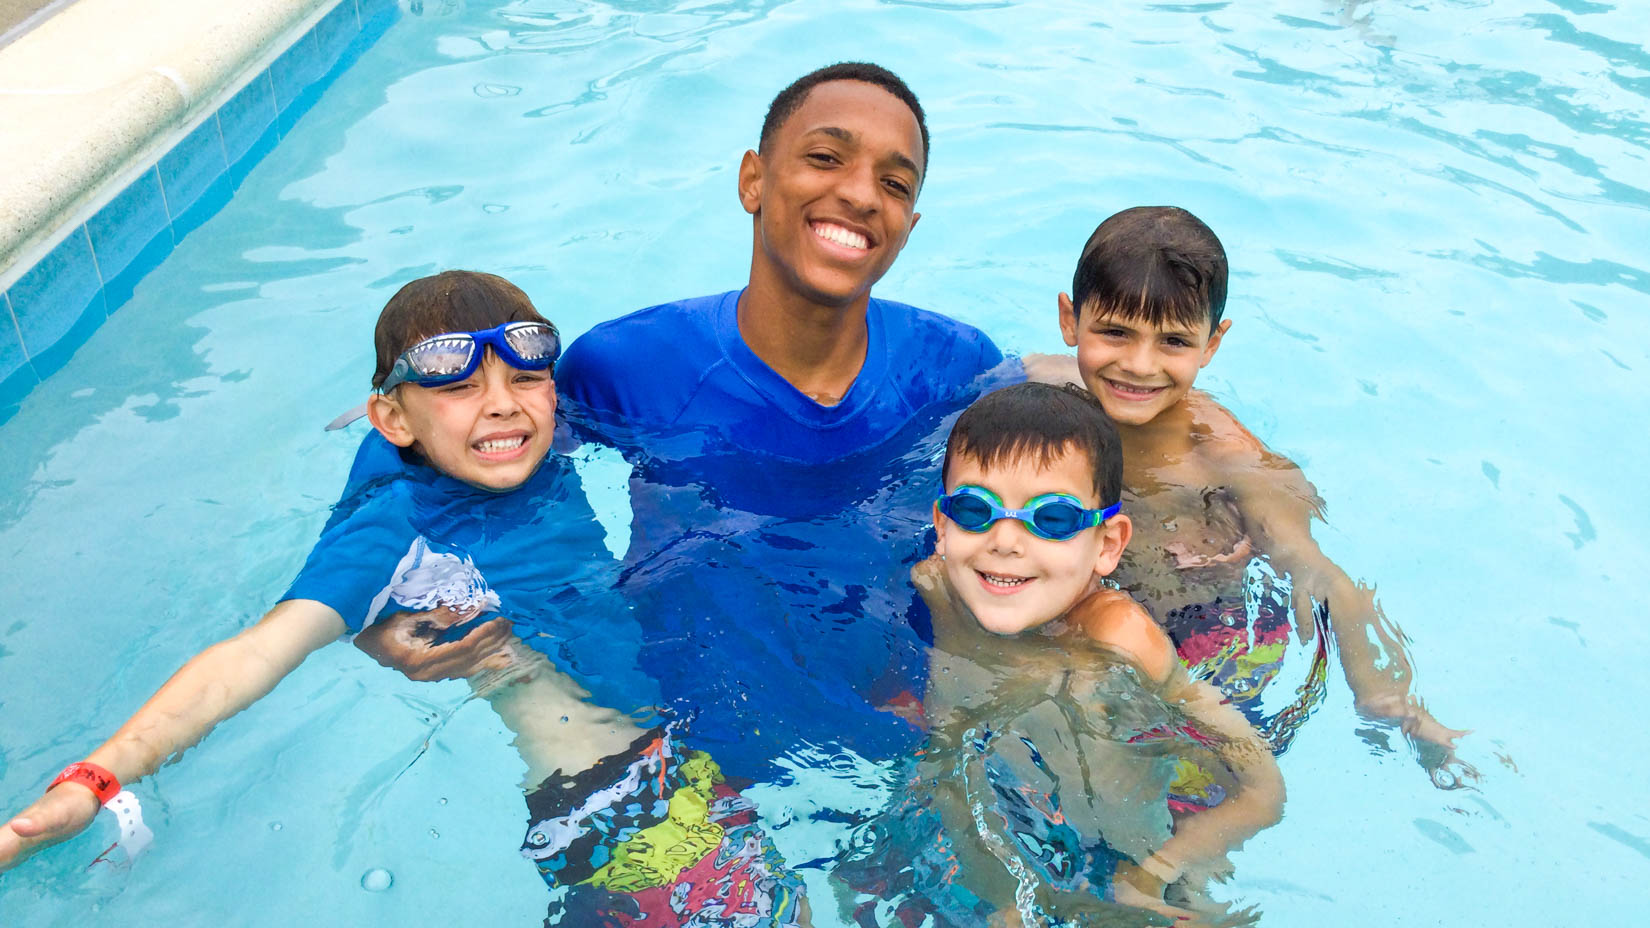 Counselor in the pool with campers.